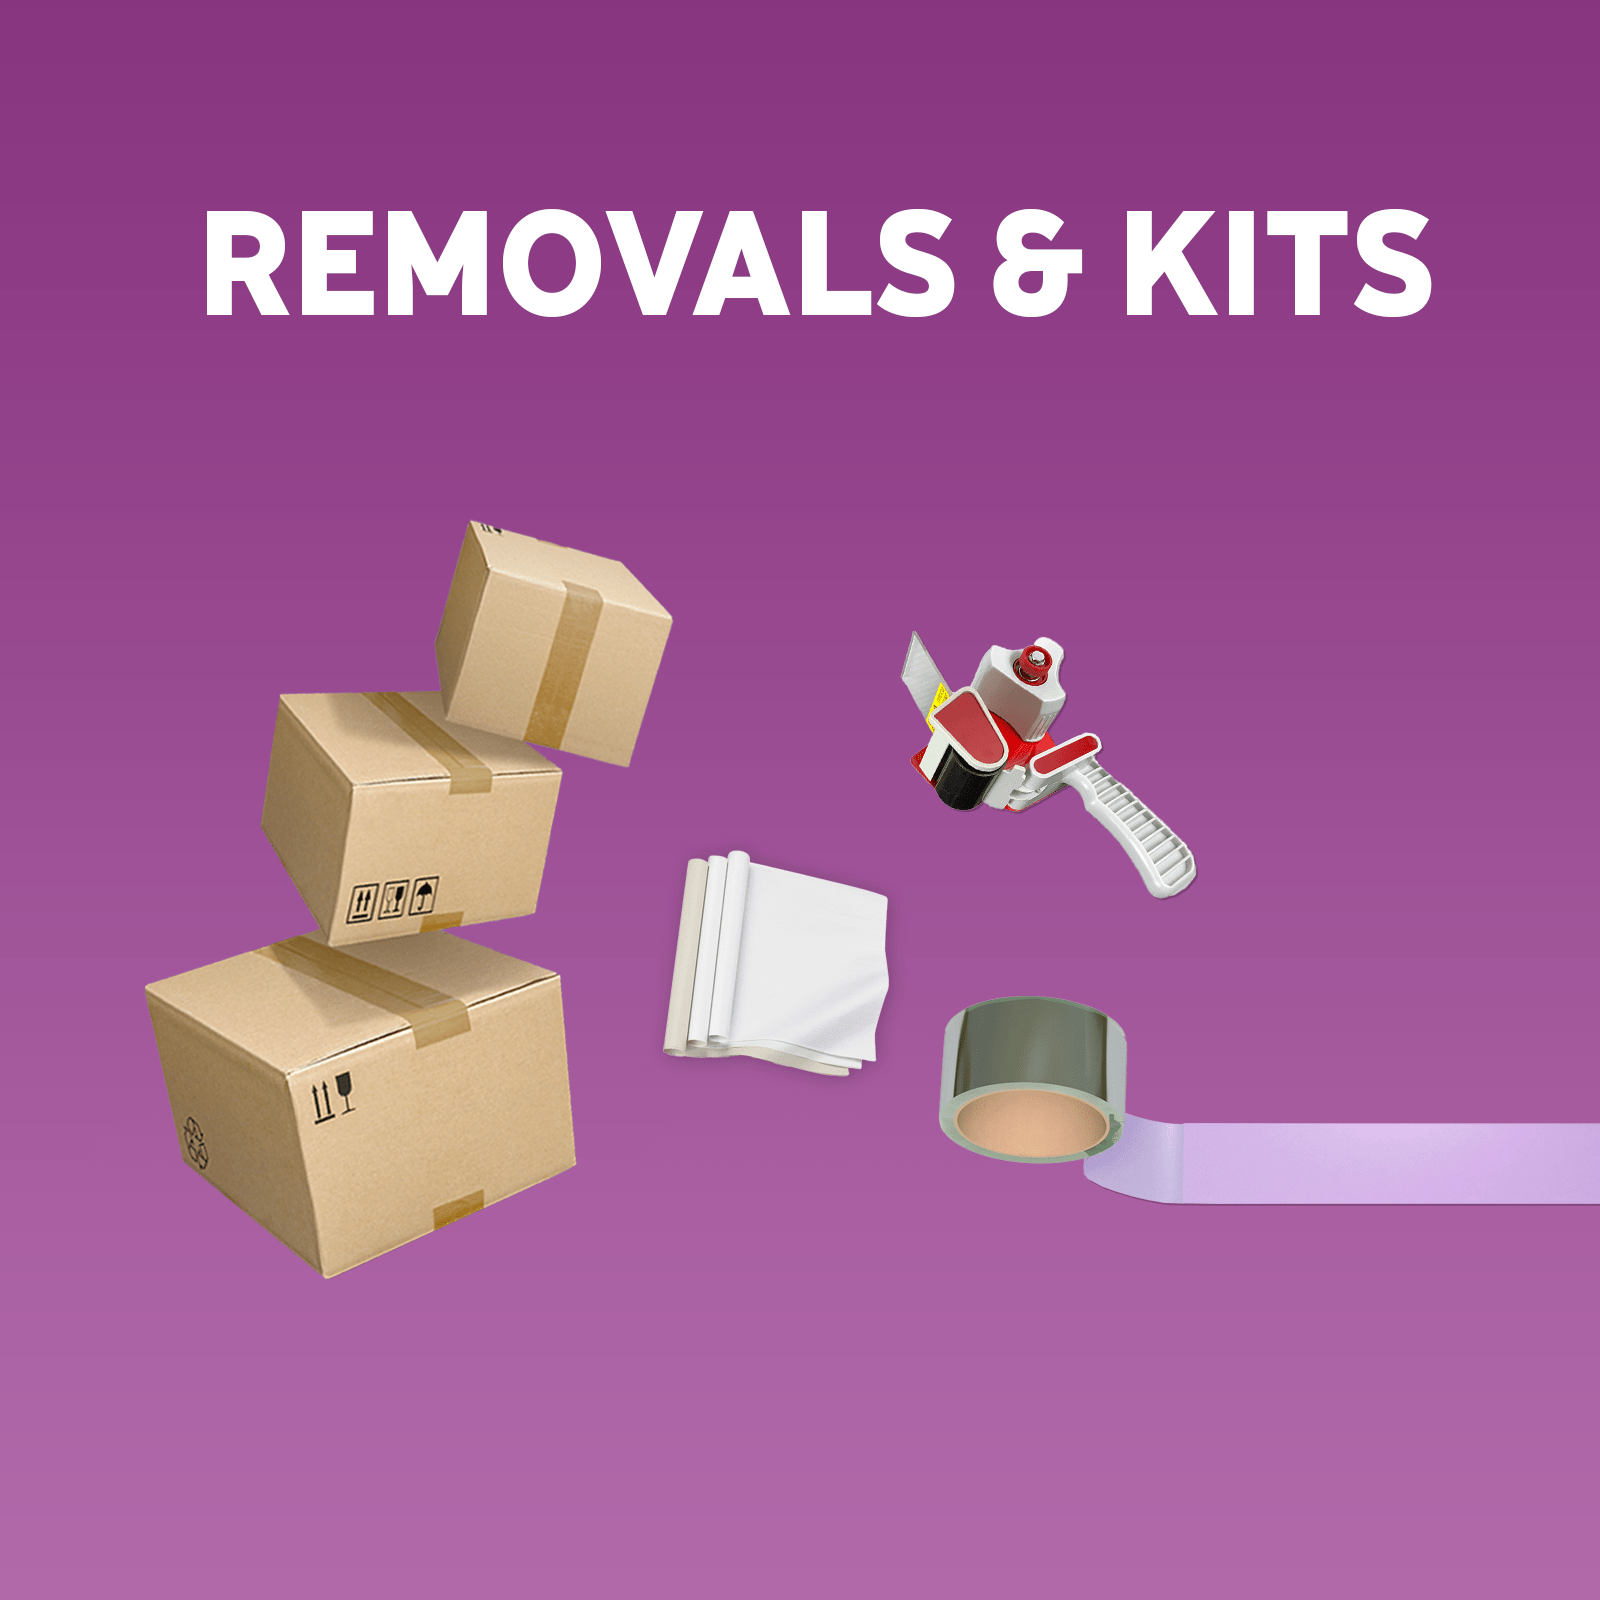 REMOVALS